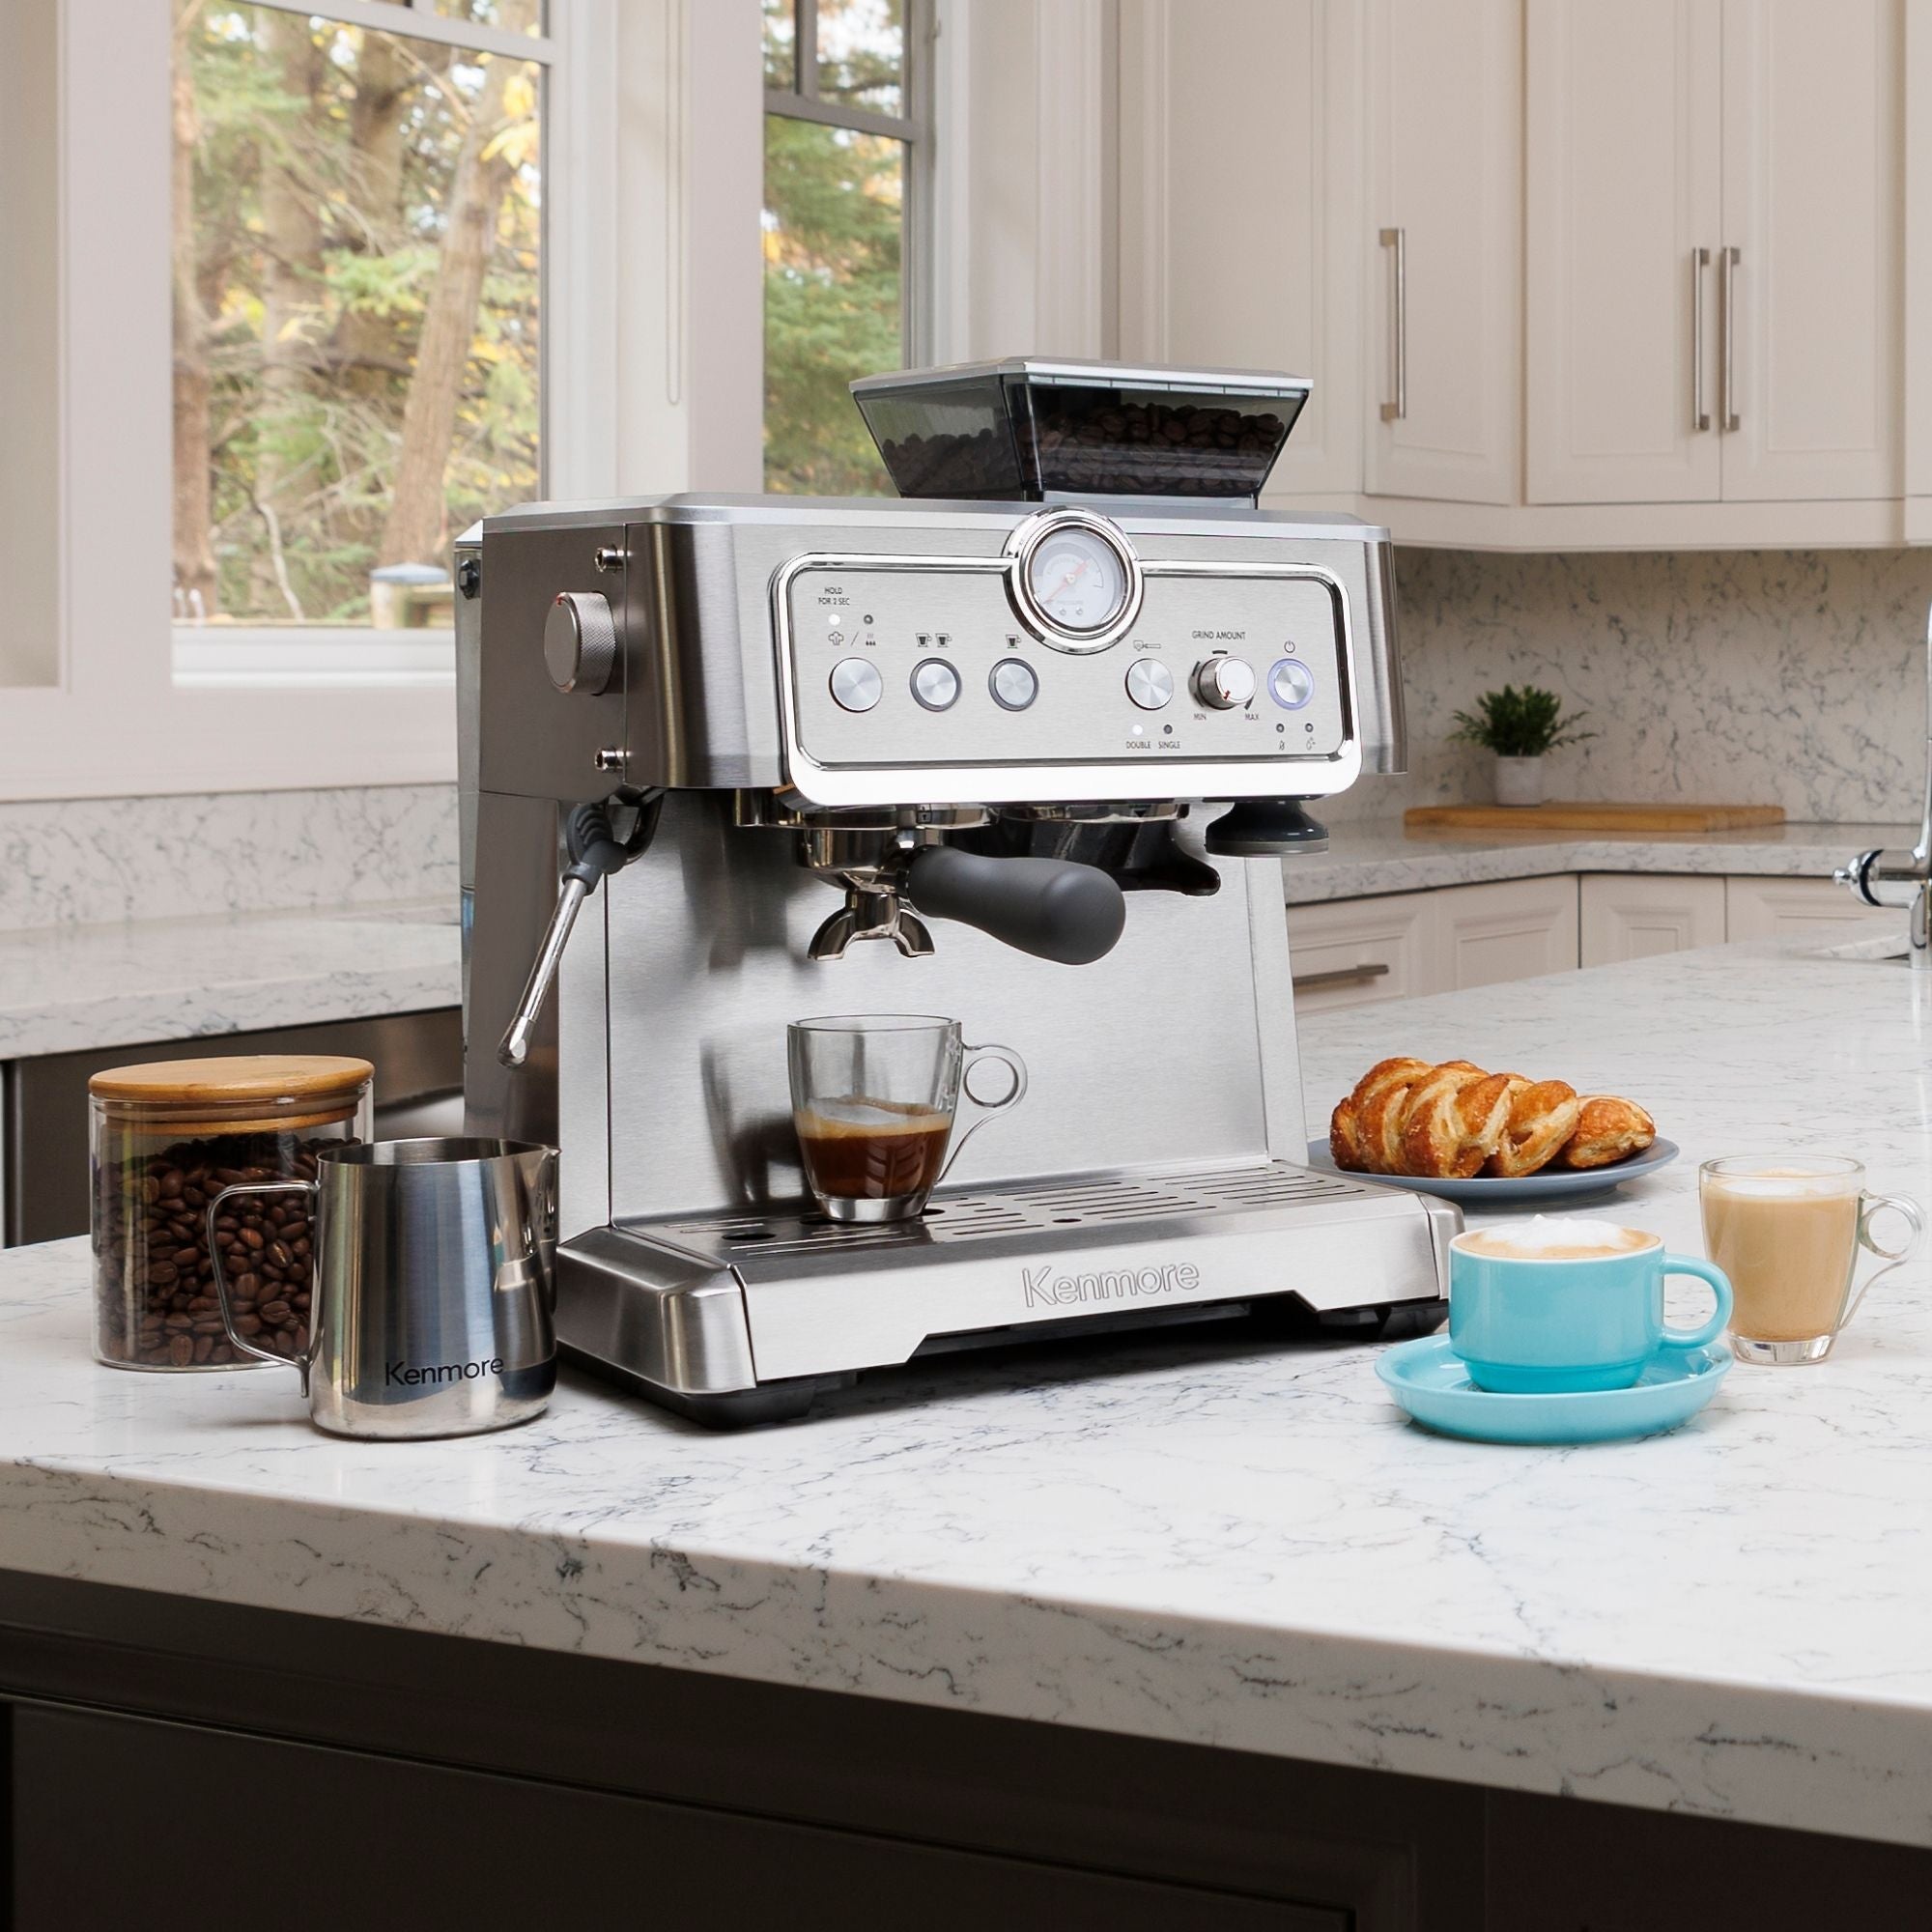 Kenmore semi-automatic espresso maker with espresso being extracted into two clear cups on a white marble countertop in a bright white kitchen. A jar of whole coffee beans, stainless steel milk pitcher, a pastry, a latte in a clear mug, and a cappuccino in a light blue mug are arranged around it.